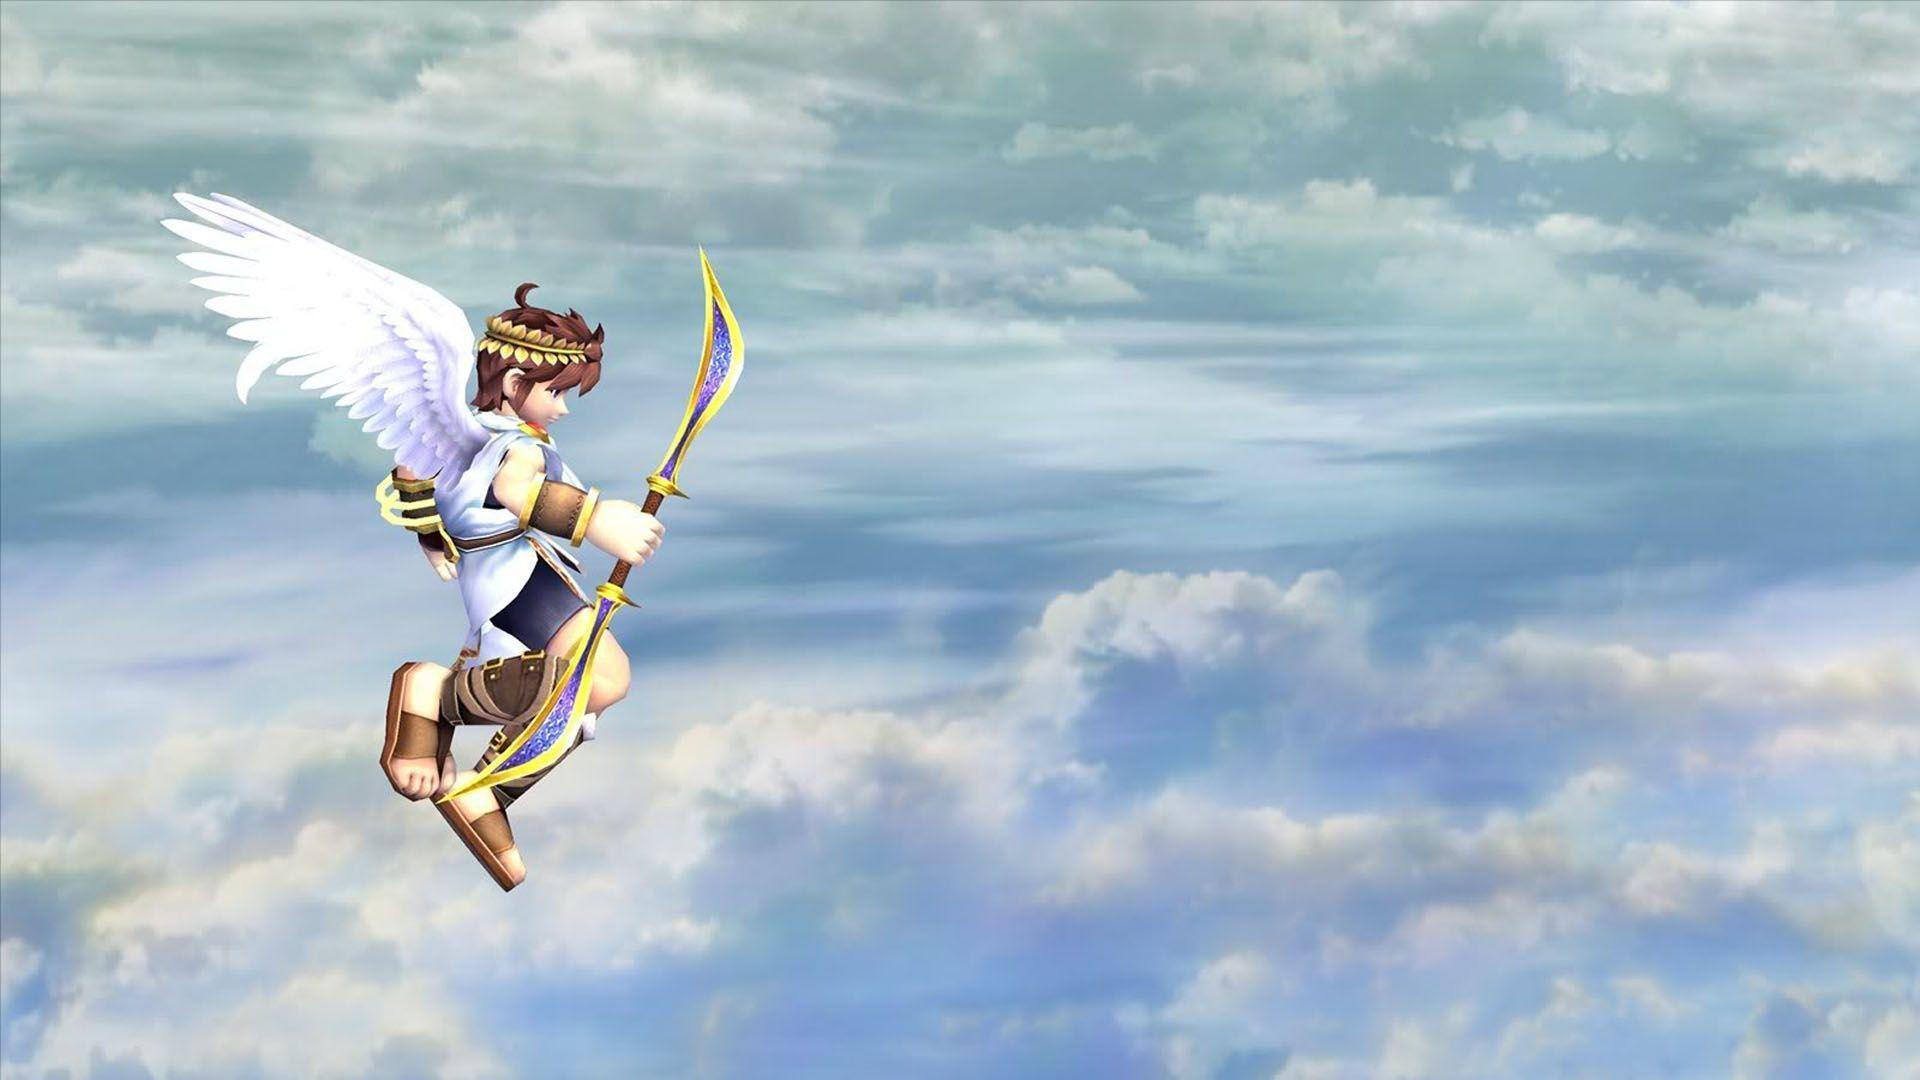 Kid Icarus Games Wallpaper Image featuring Classic